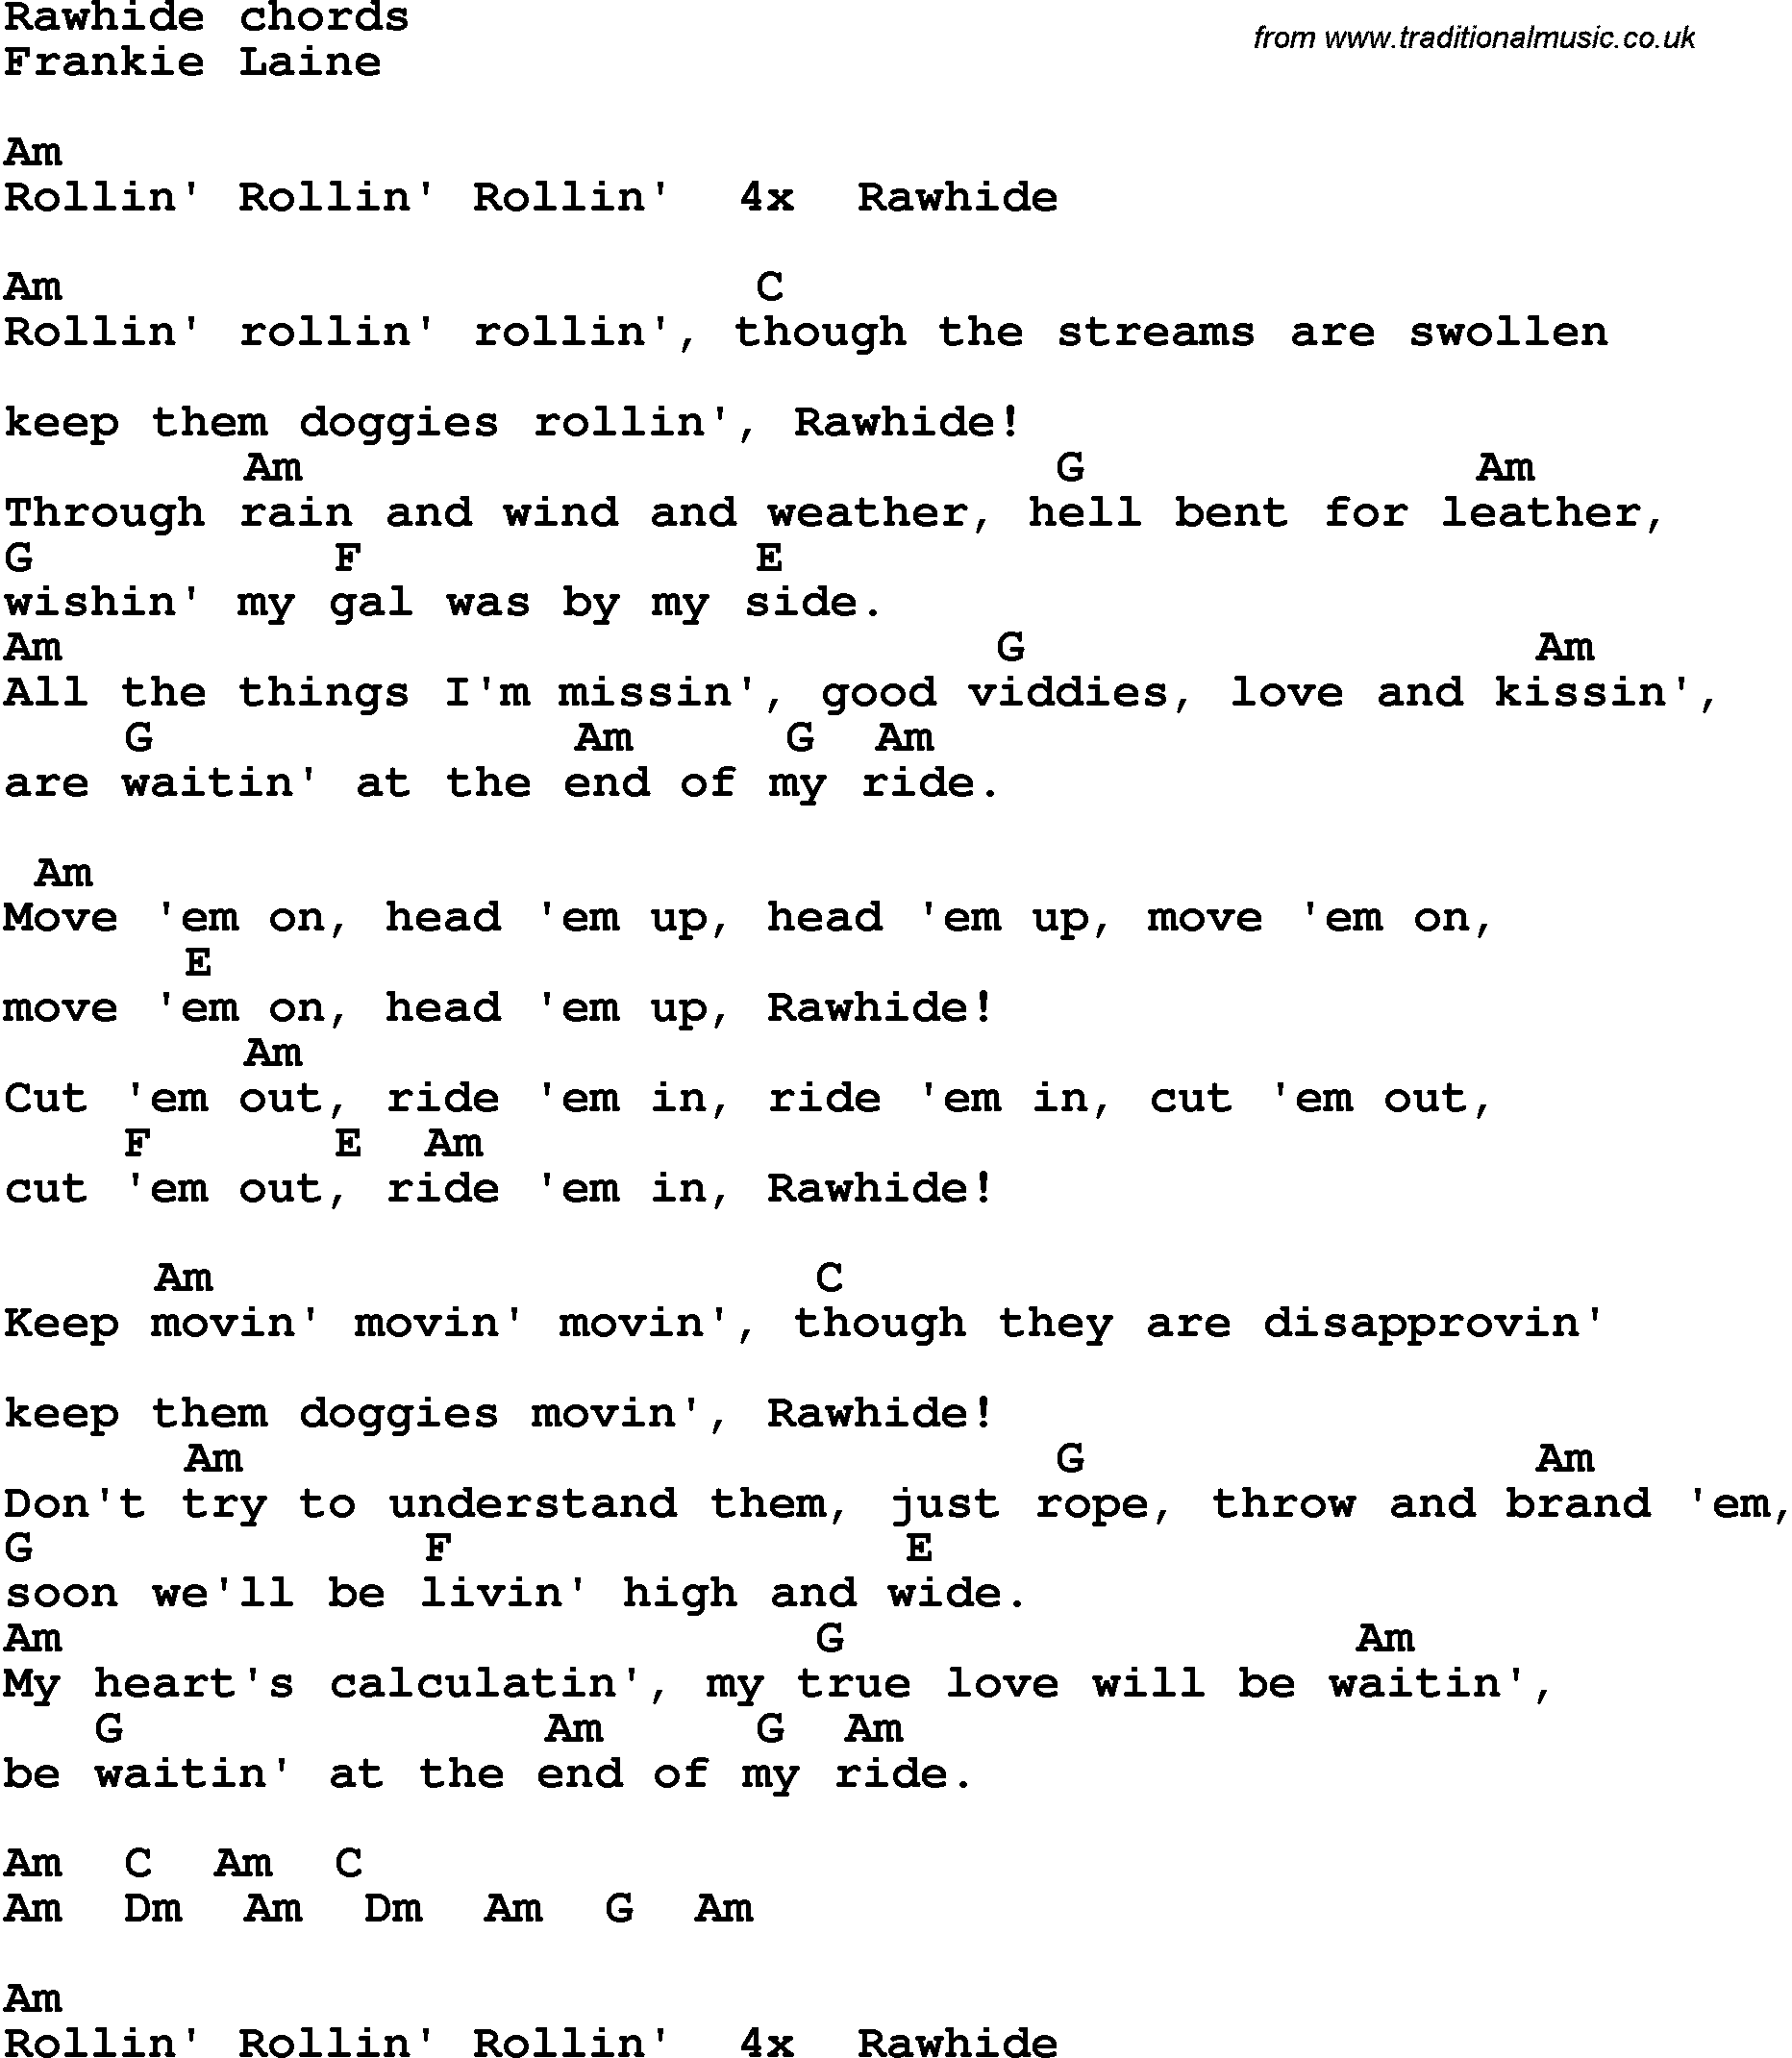 Song Lyrics with guitar chords for Rawhide